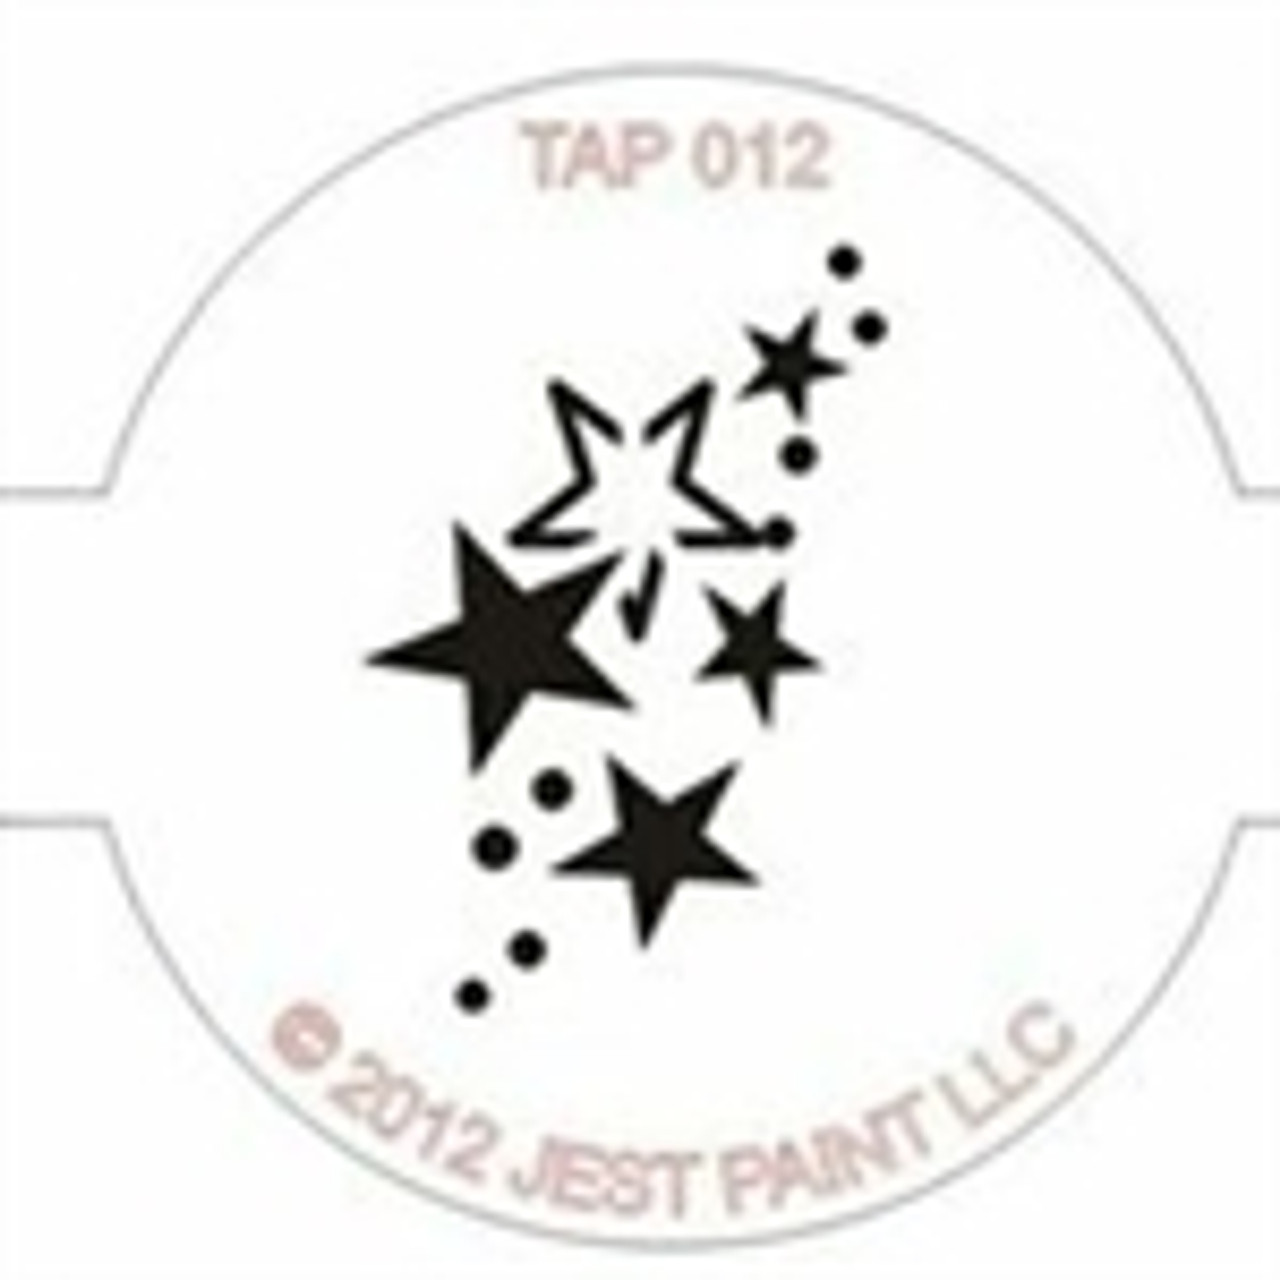 TAP 012 Face Painting Stencil - Stars